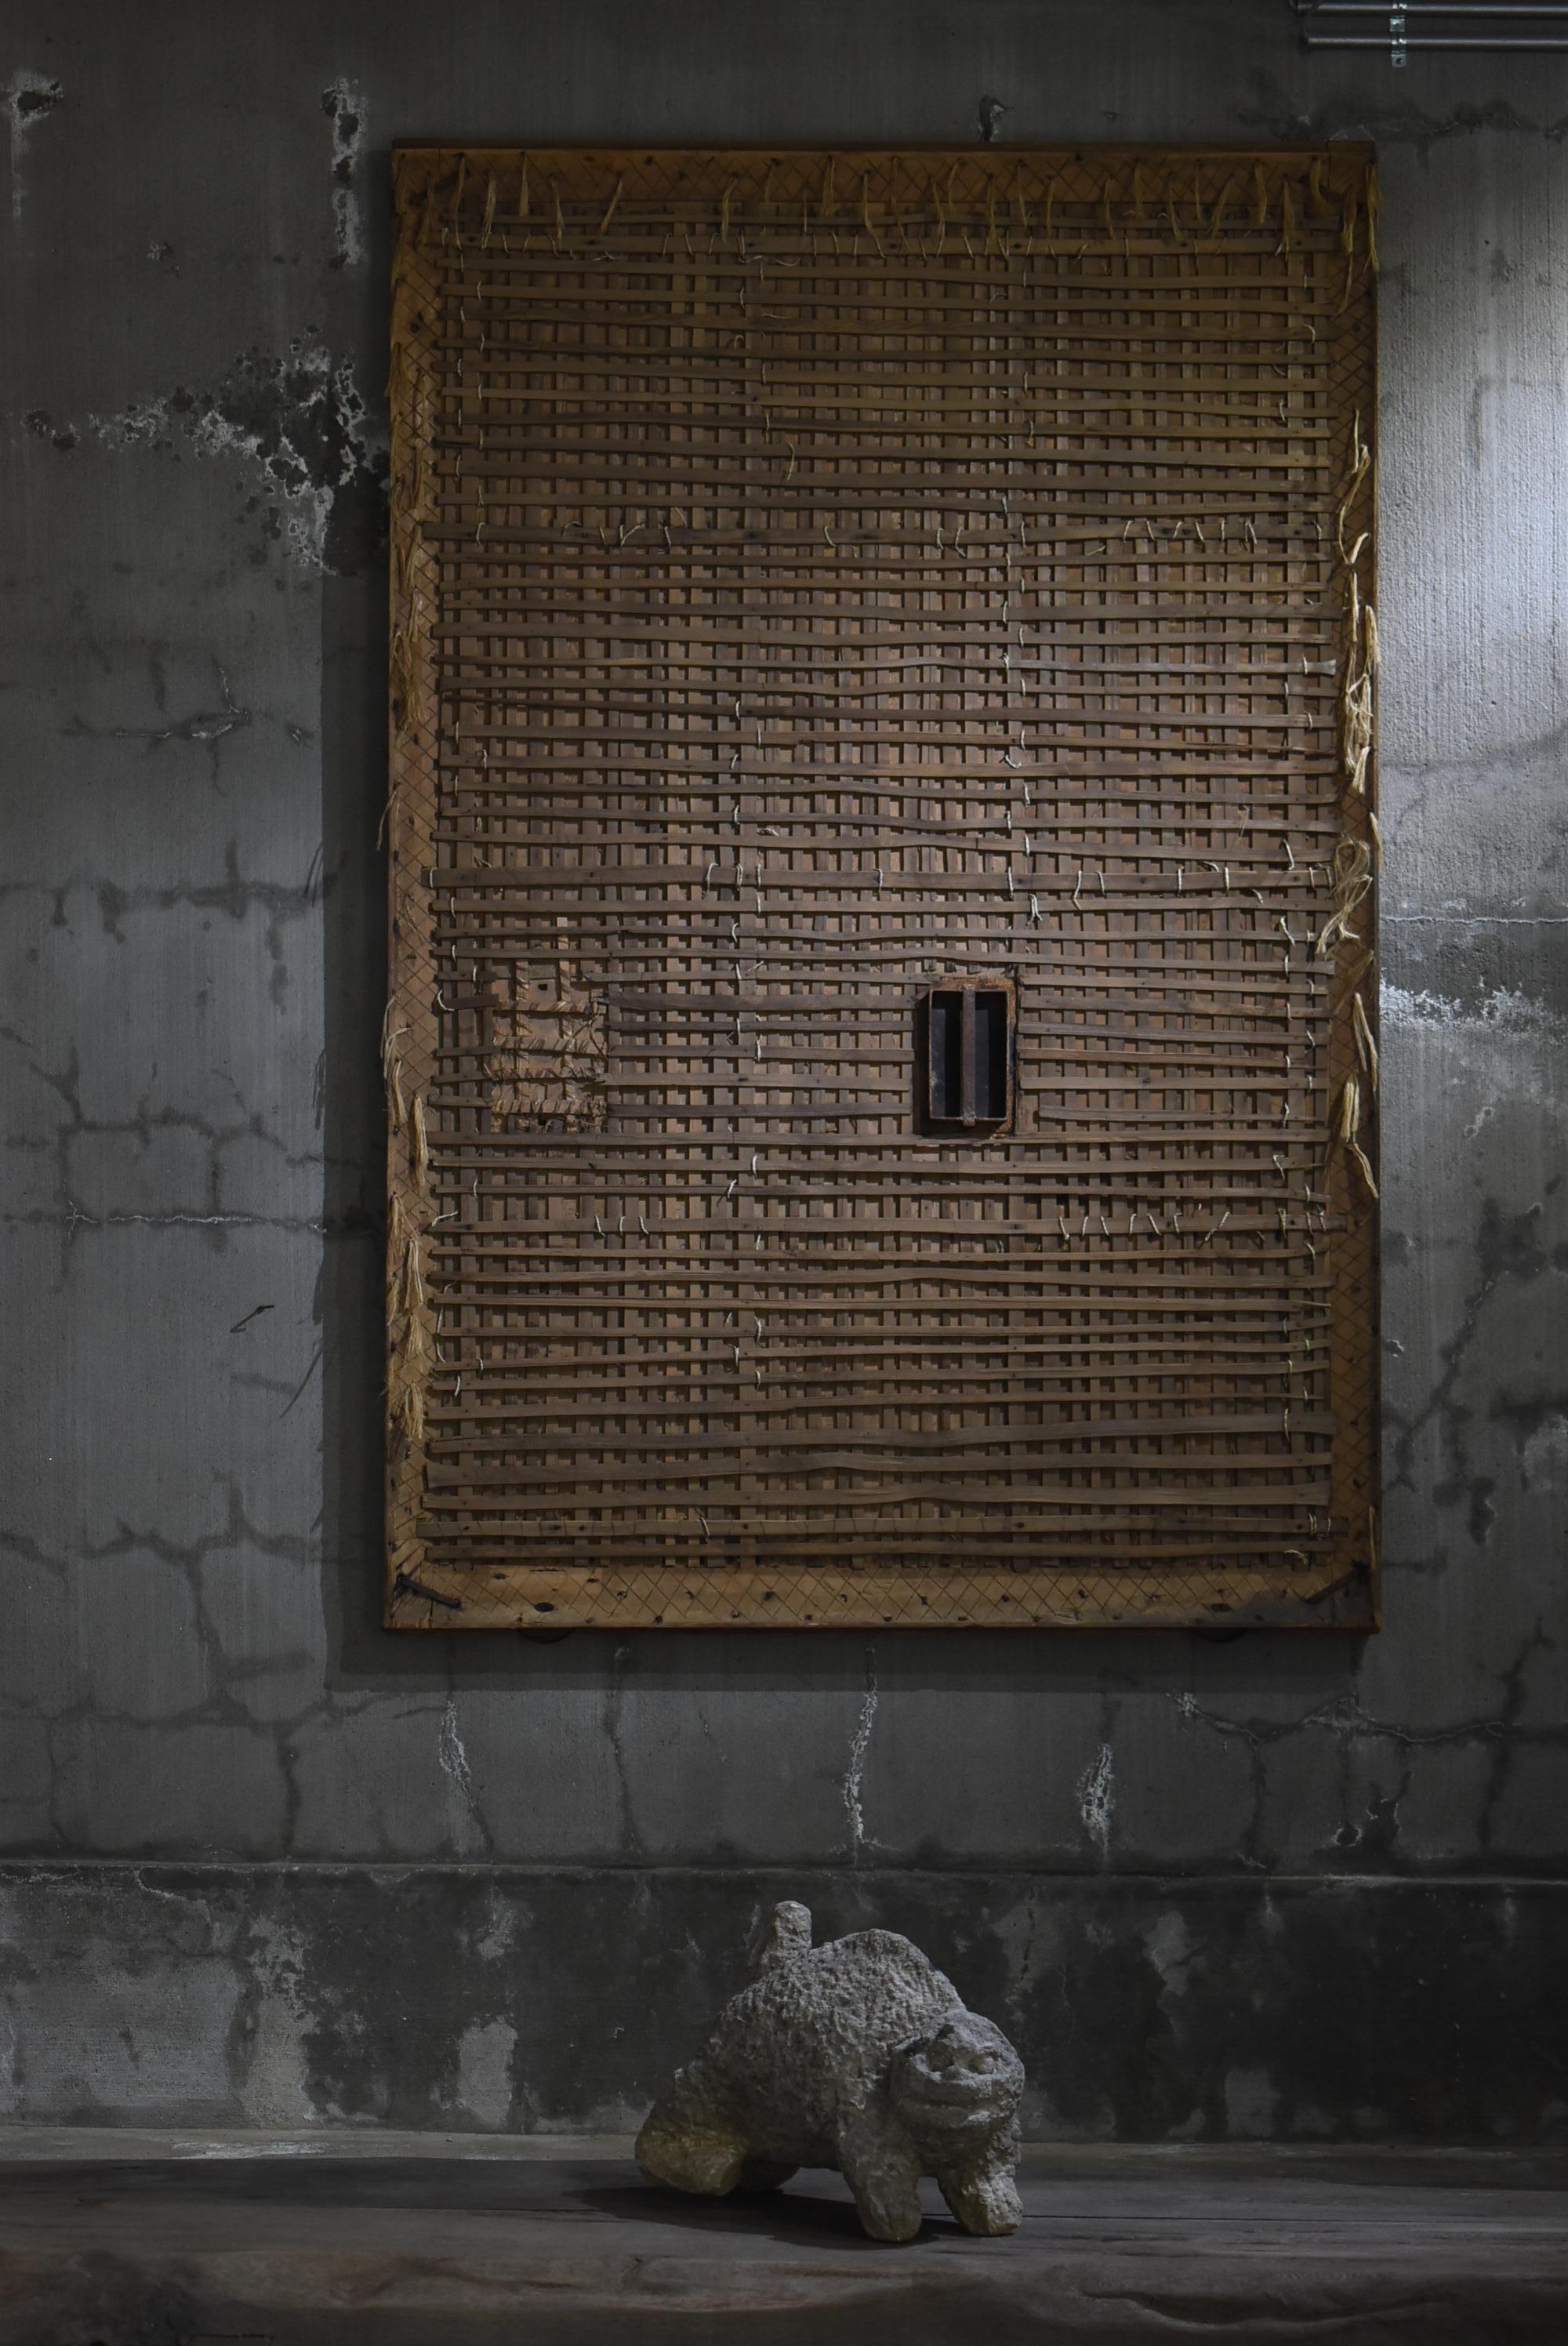 This is a huge door from a very old Japanese warehouse (kura).
This door was made in the Meiji era. (1860s-1900s).
It is mainly made of cedar wood with iron handles.

The door was made of plaster and earth, but the plaster has peeled away to